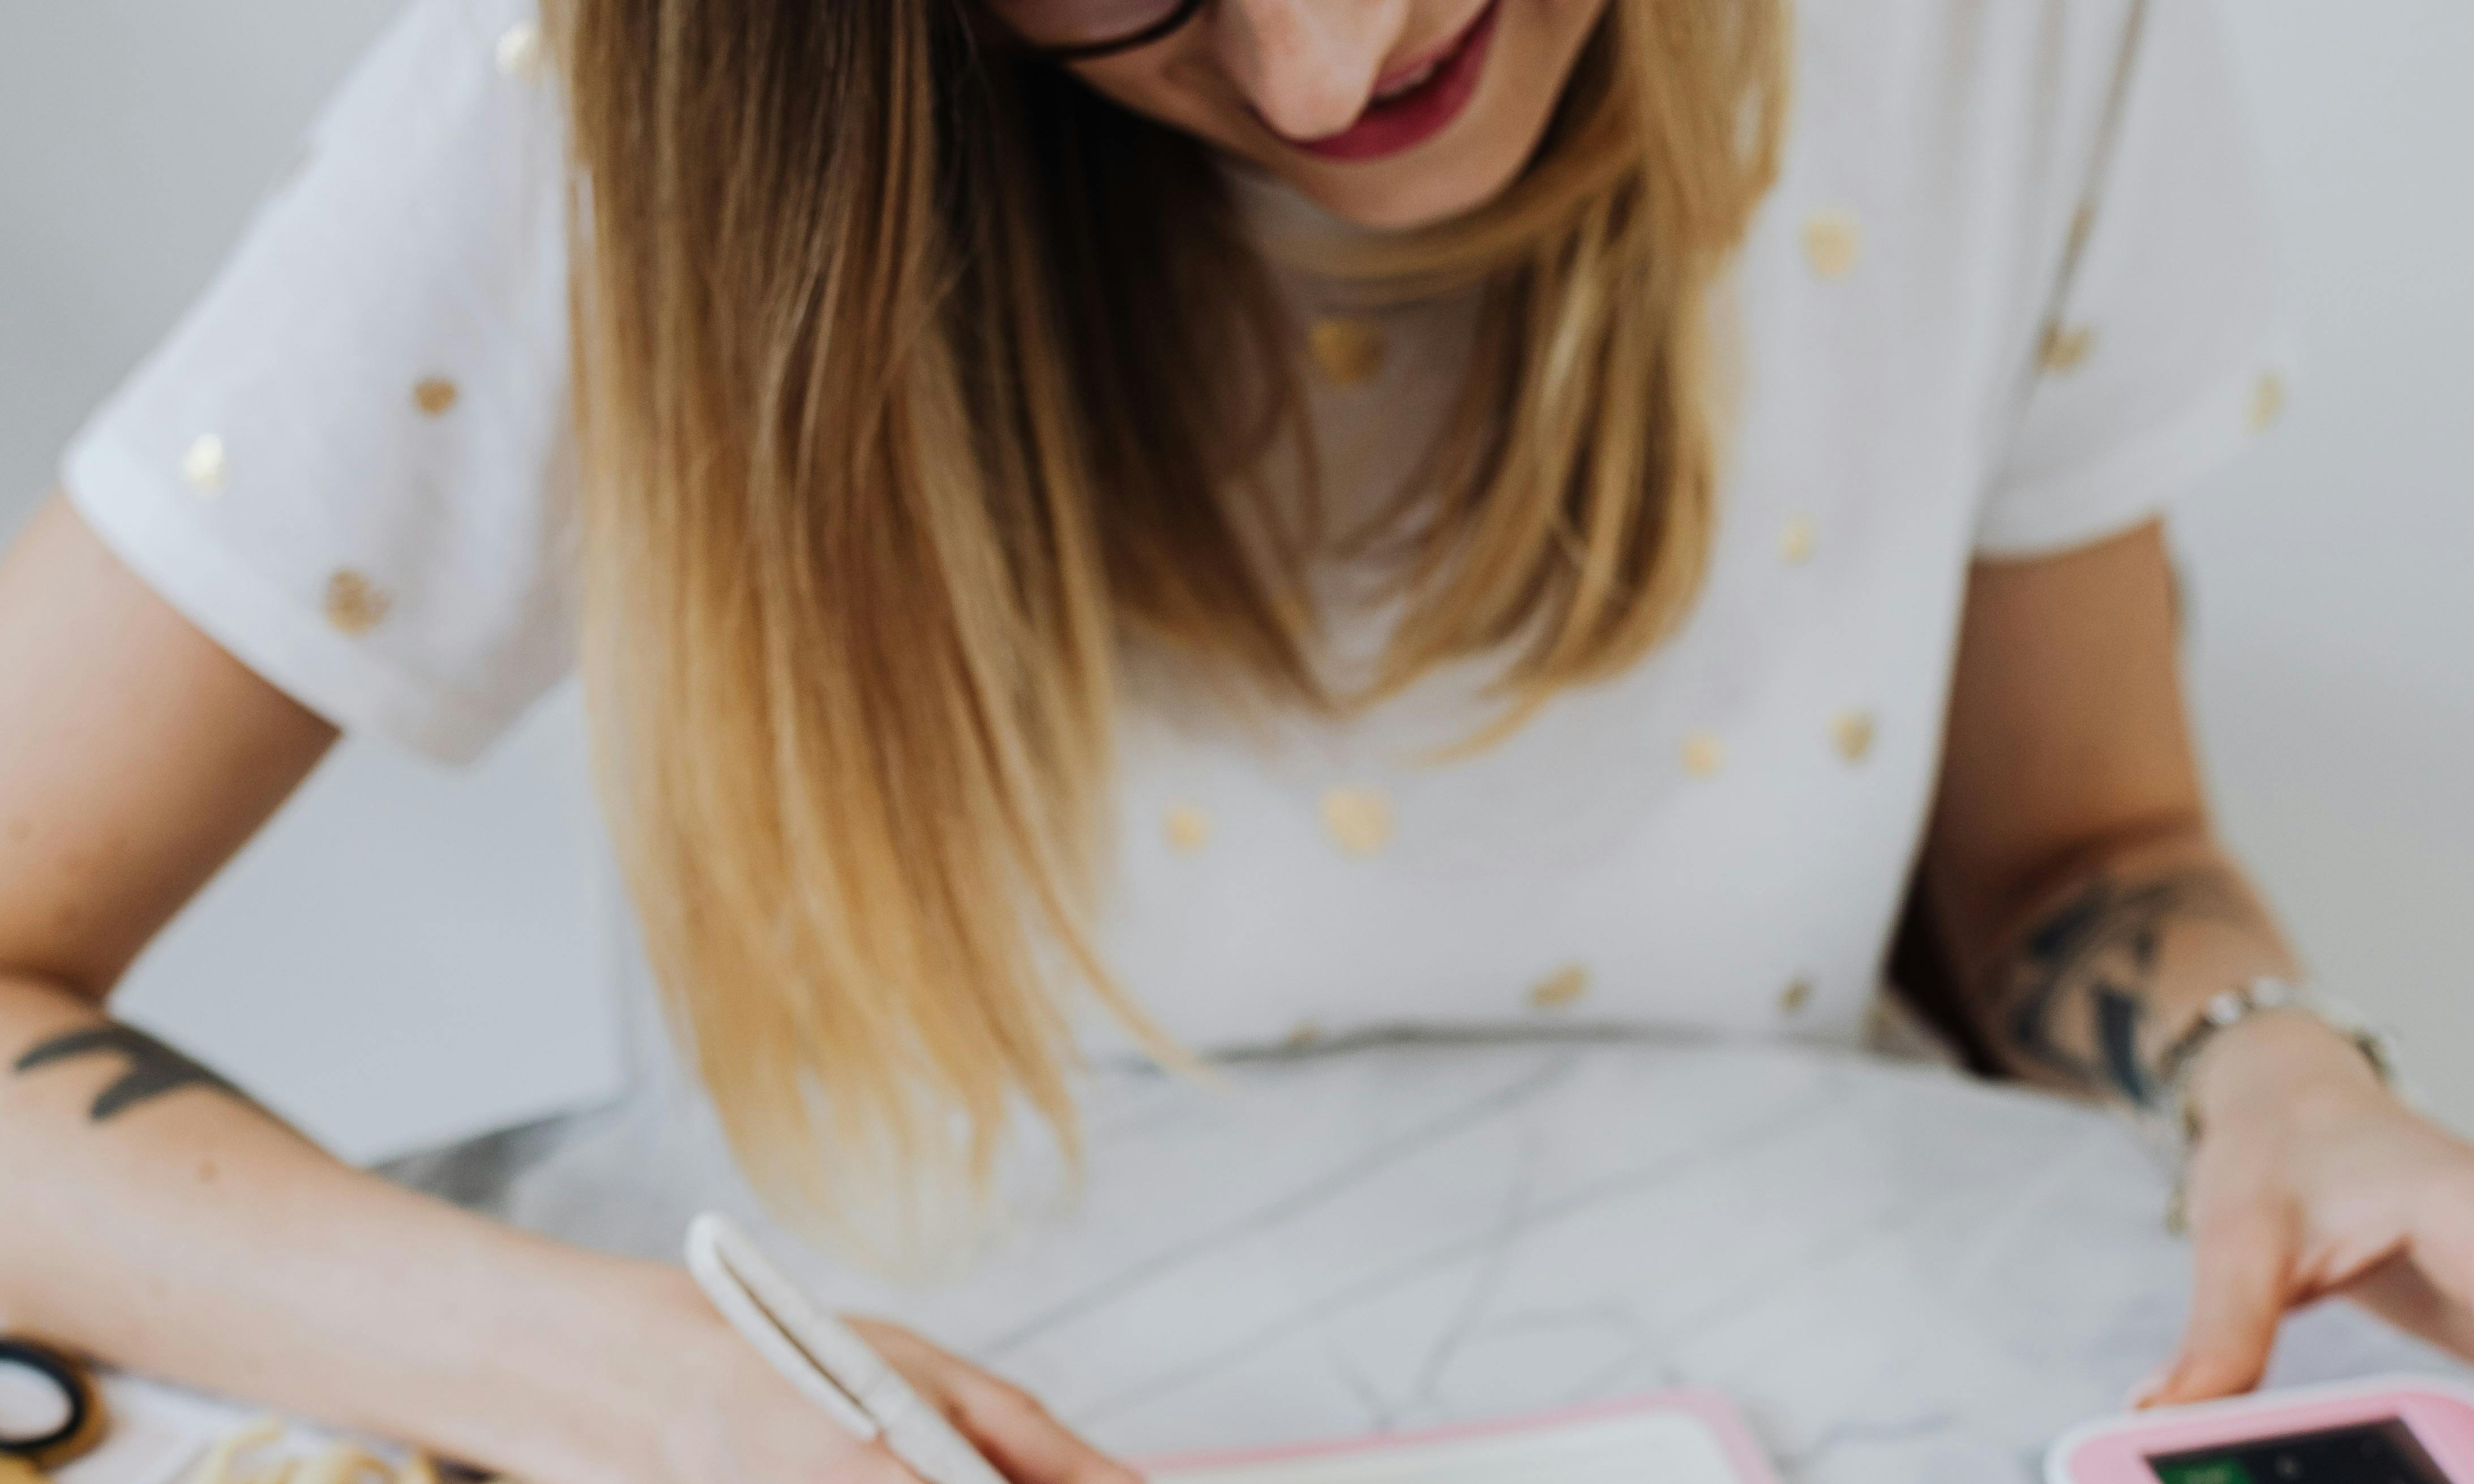 A woman making calculations with a pen in hand | Source: Pexels